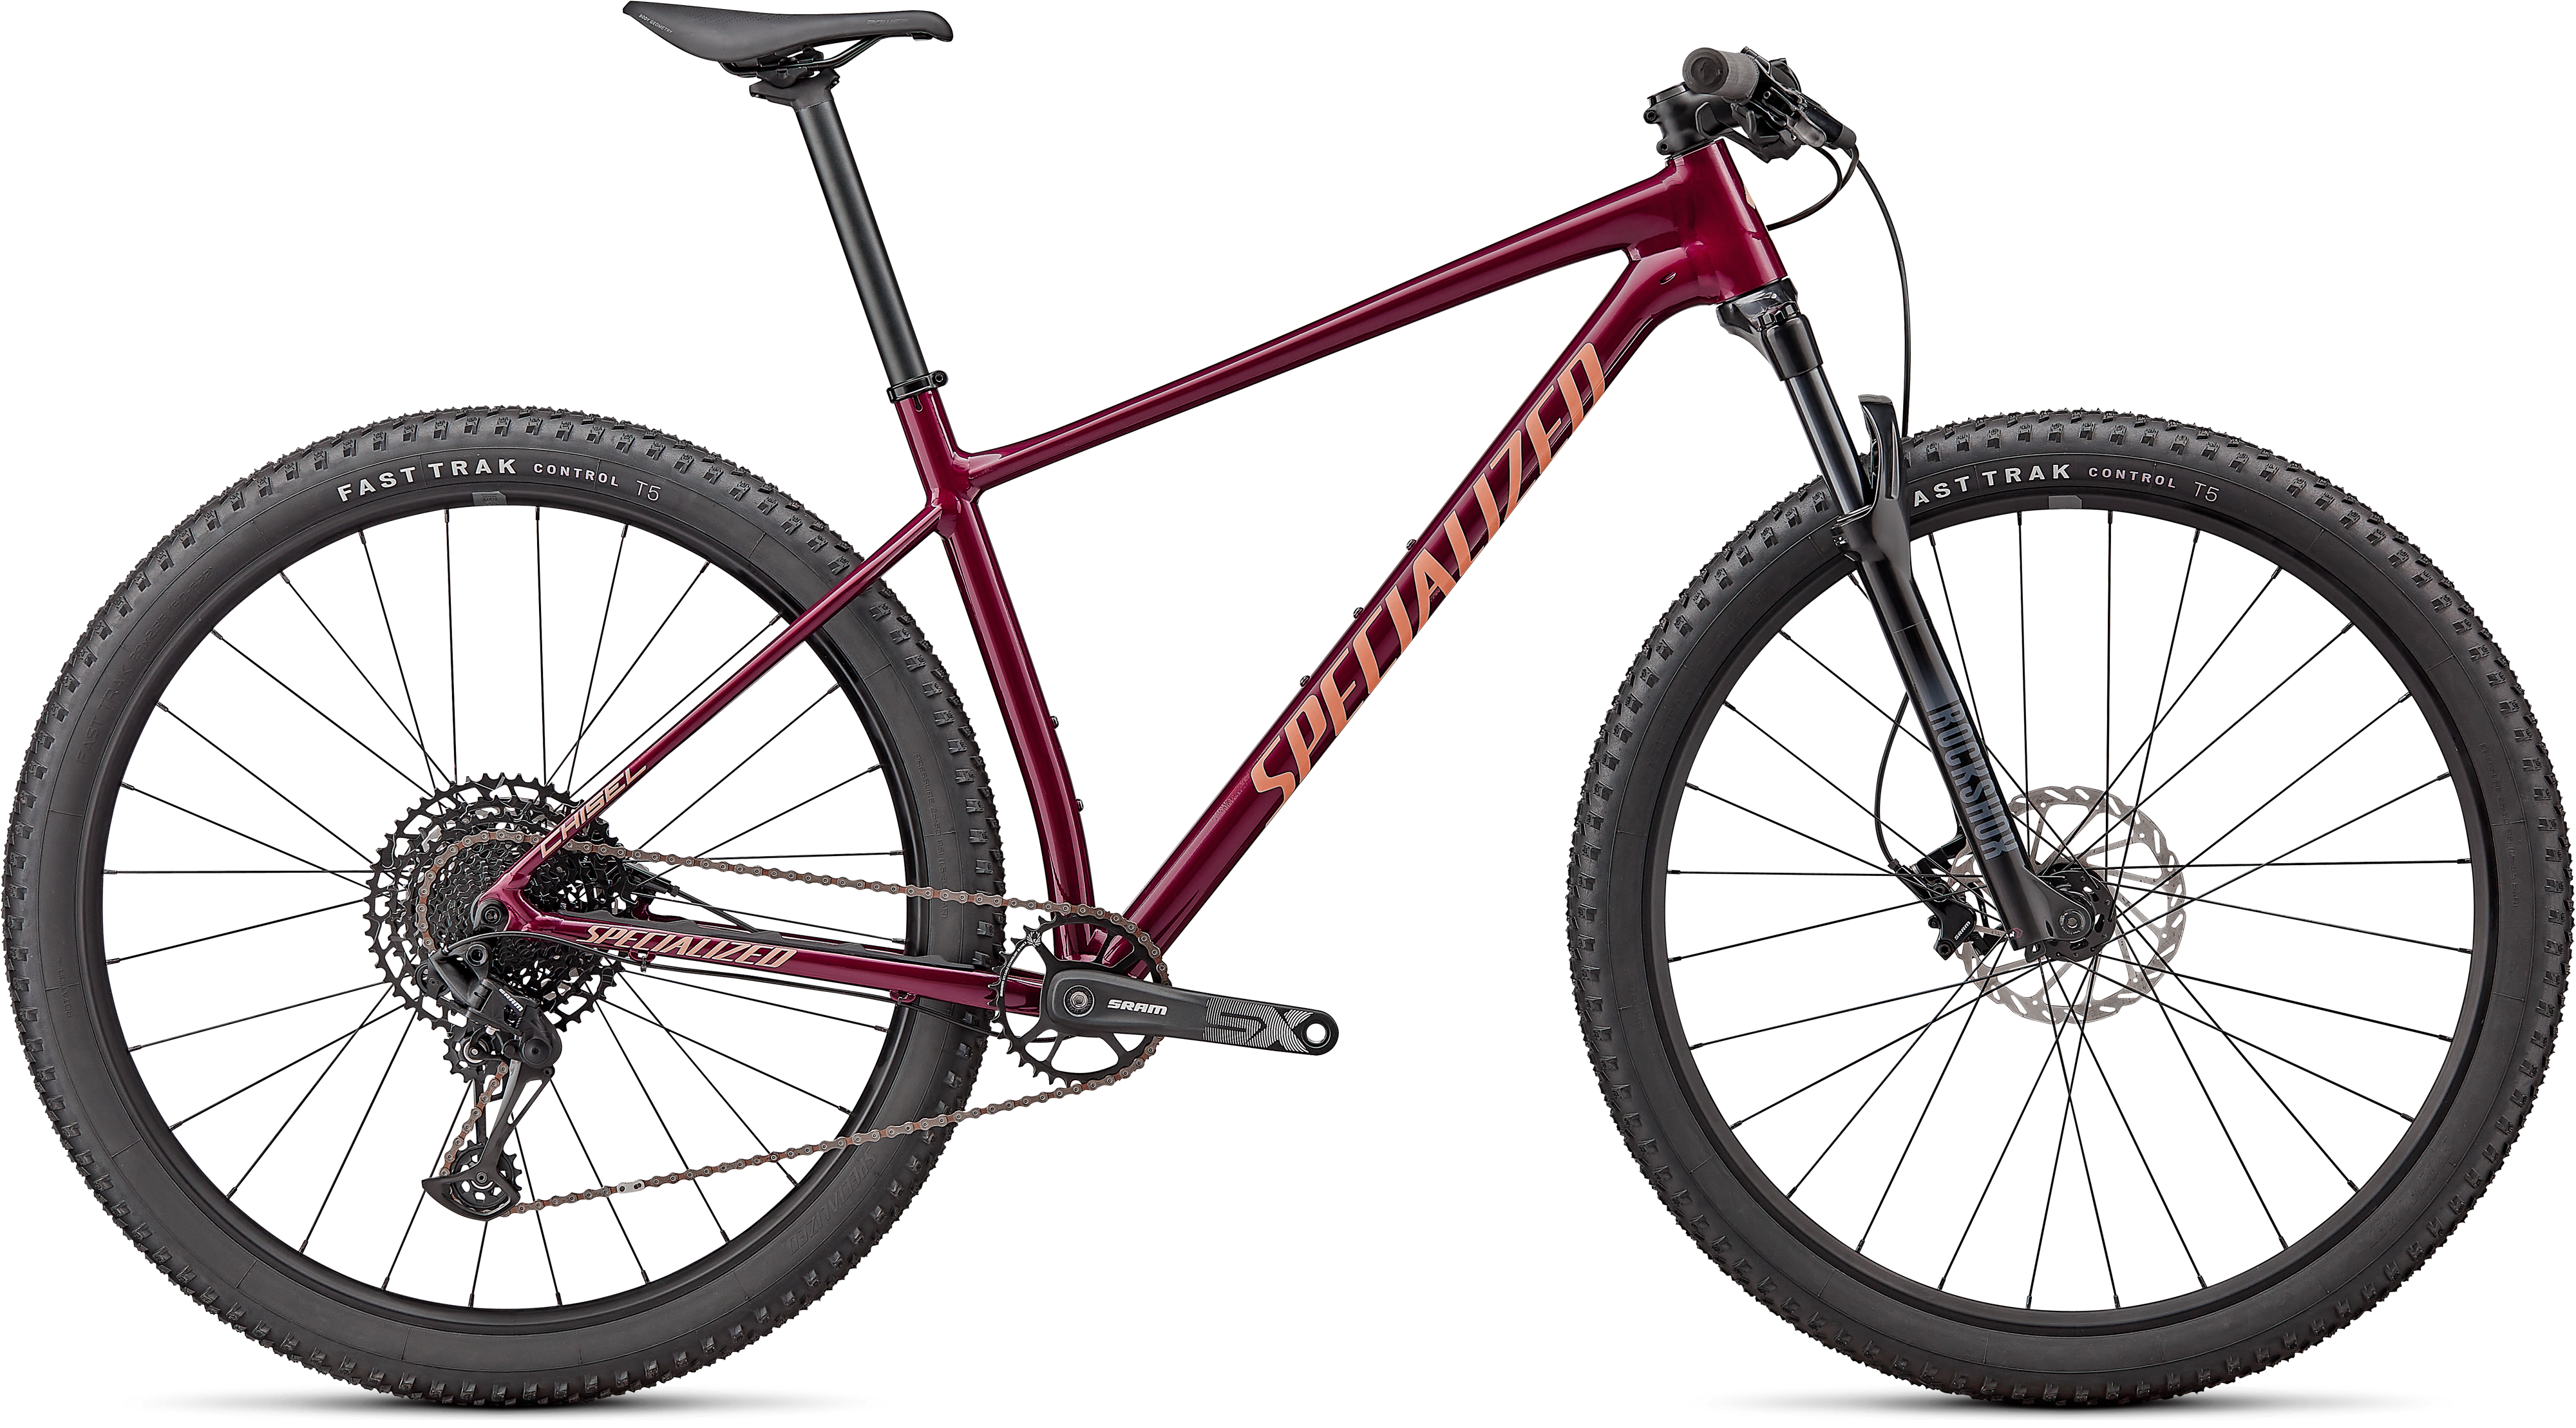 Specialized Chisel hardtail mountain bike